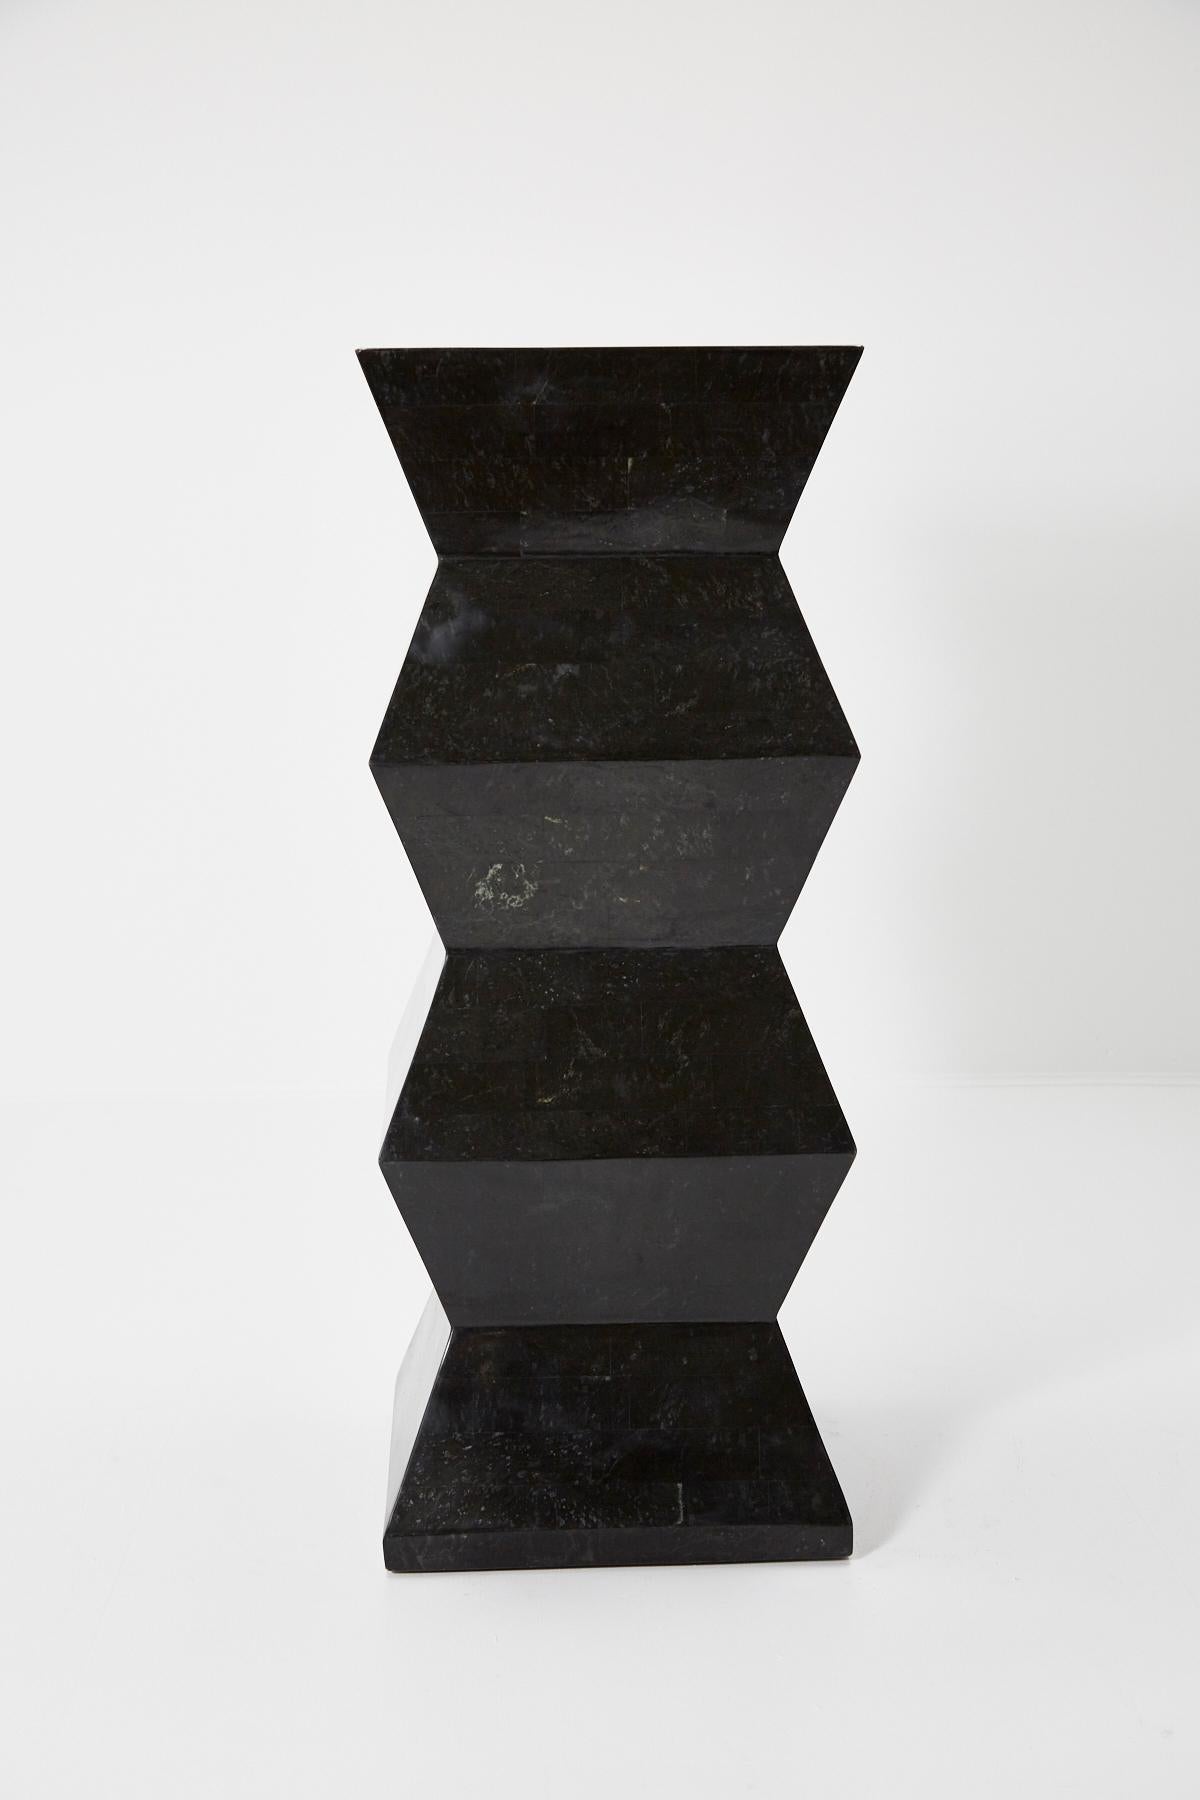 Black tessellated stone pedestal with chiseled accordion shape. Great oversized scale at 46 x 18 x 18 in. 

